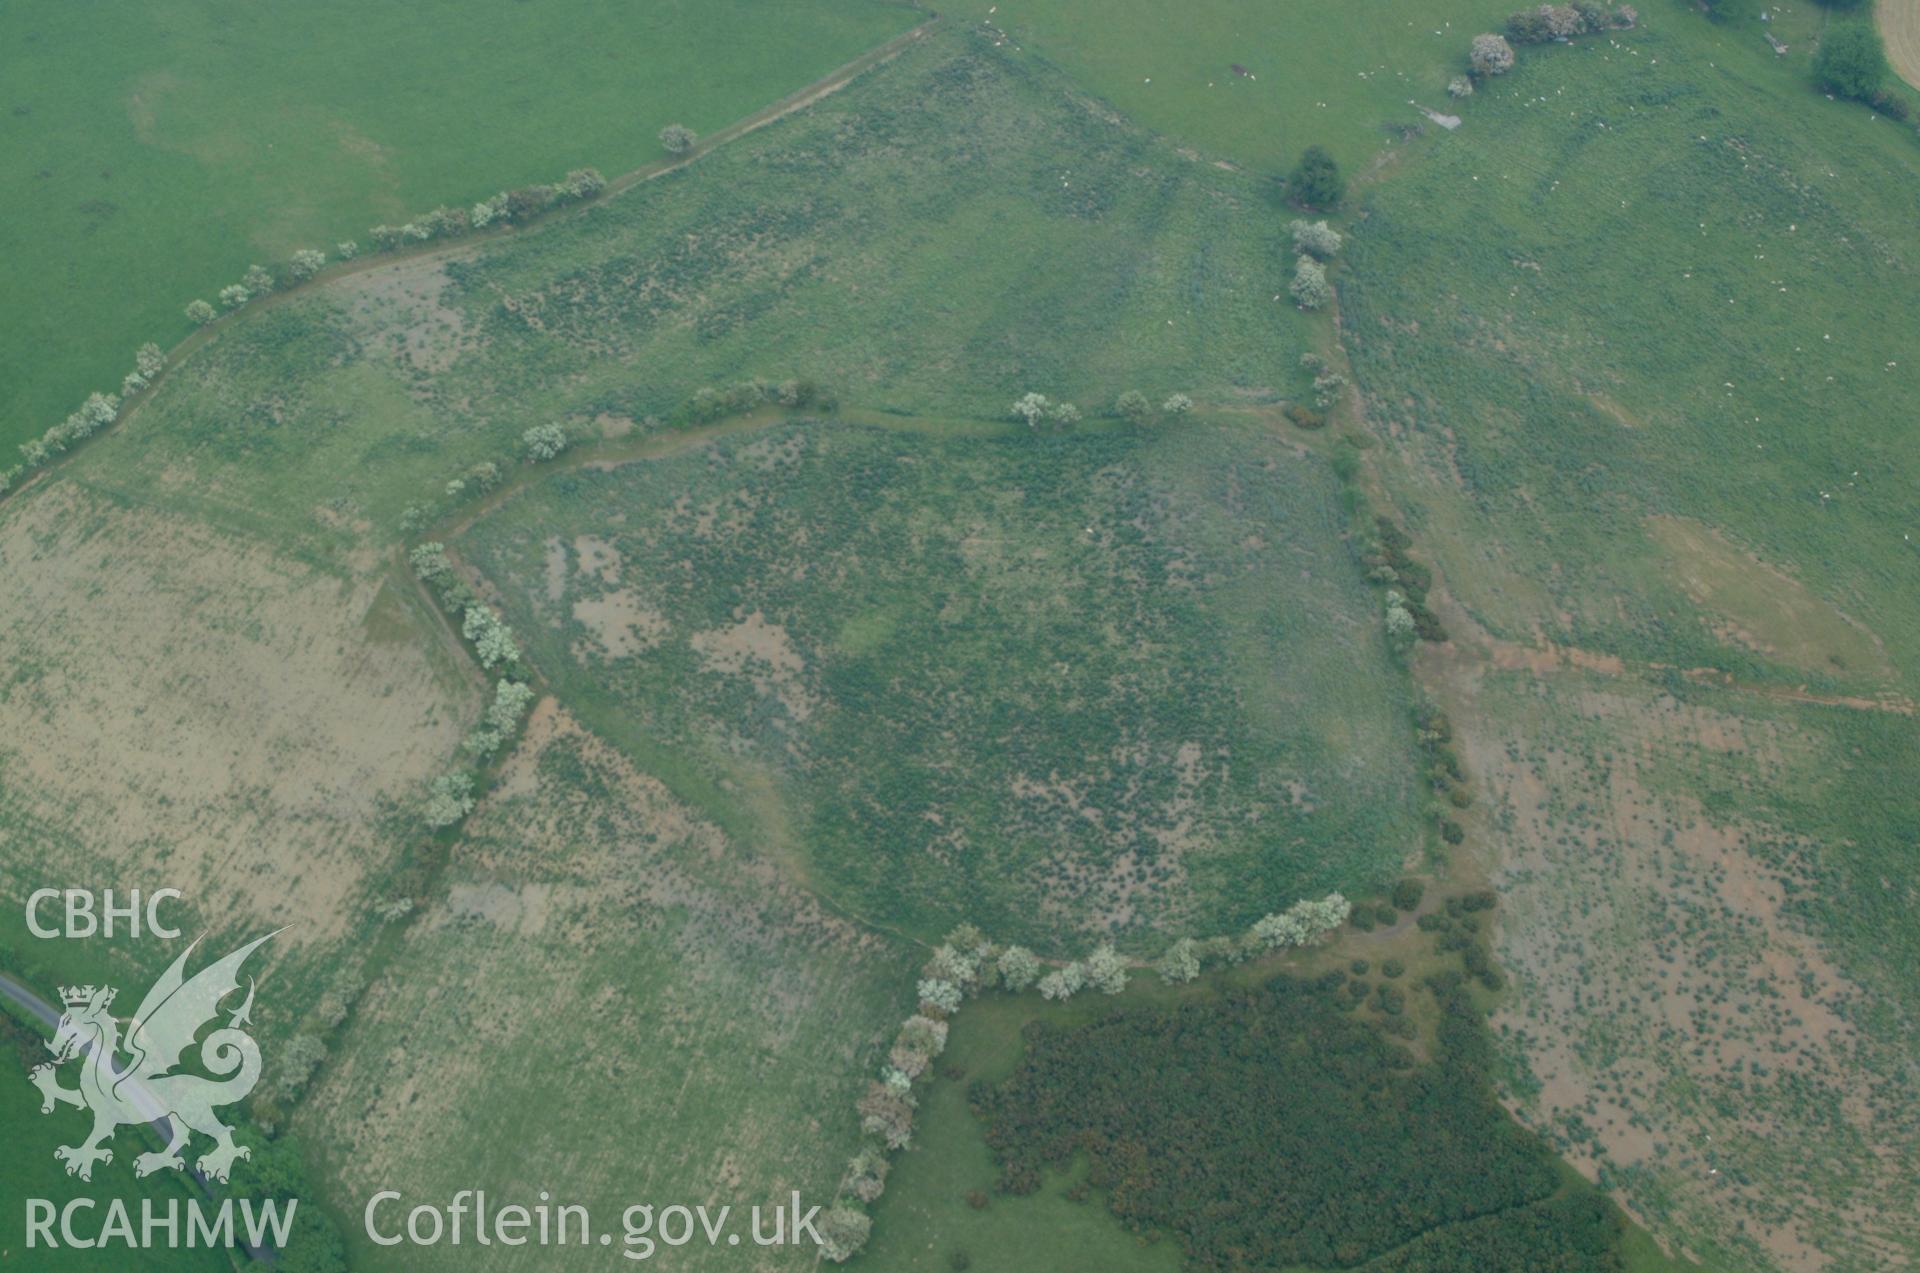 RCAHMW colour oblique aerial photograph of Pen Y Graig taken on 08/06/2004 by Toby Driver